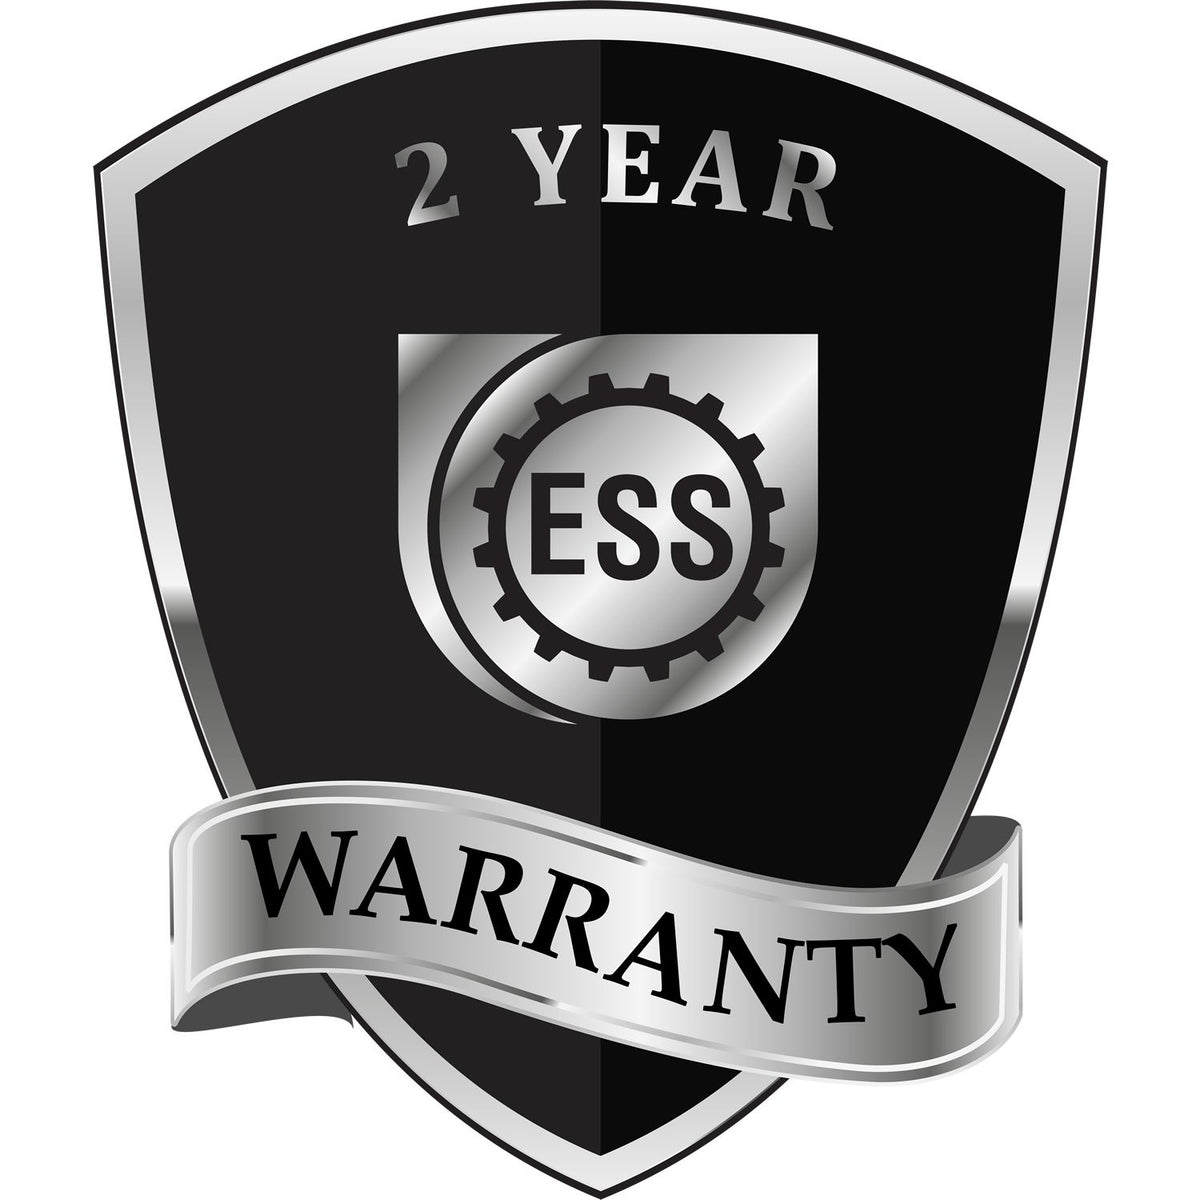 A black and silver badge or emblem showing warranty information for the Gift Maine Landscape Architect Seal